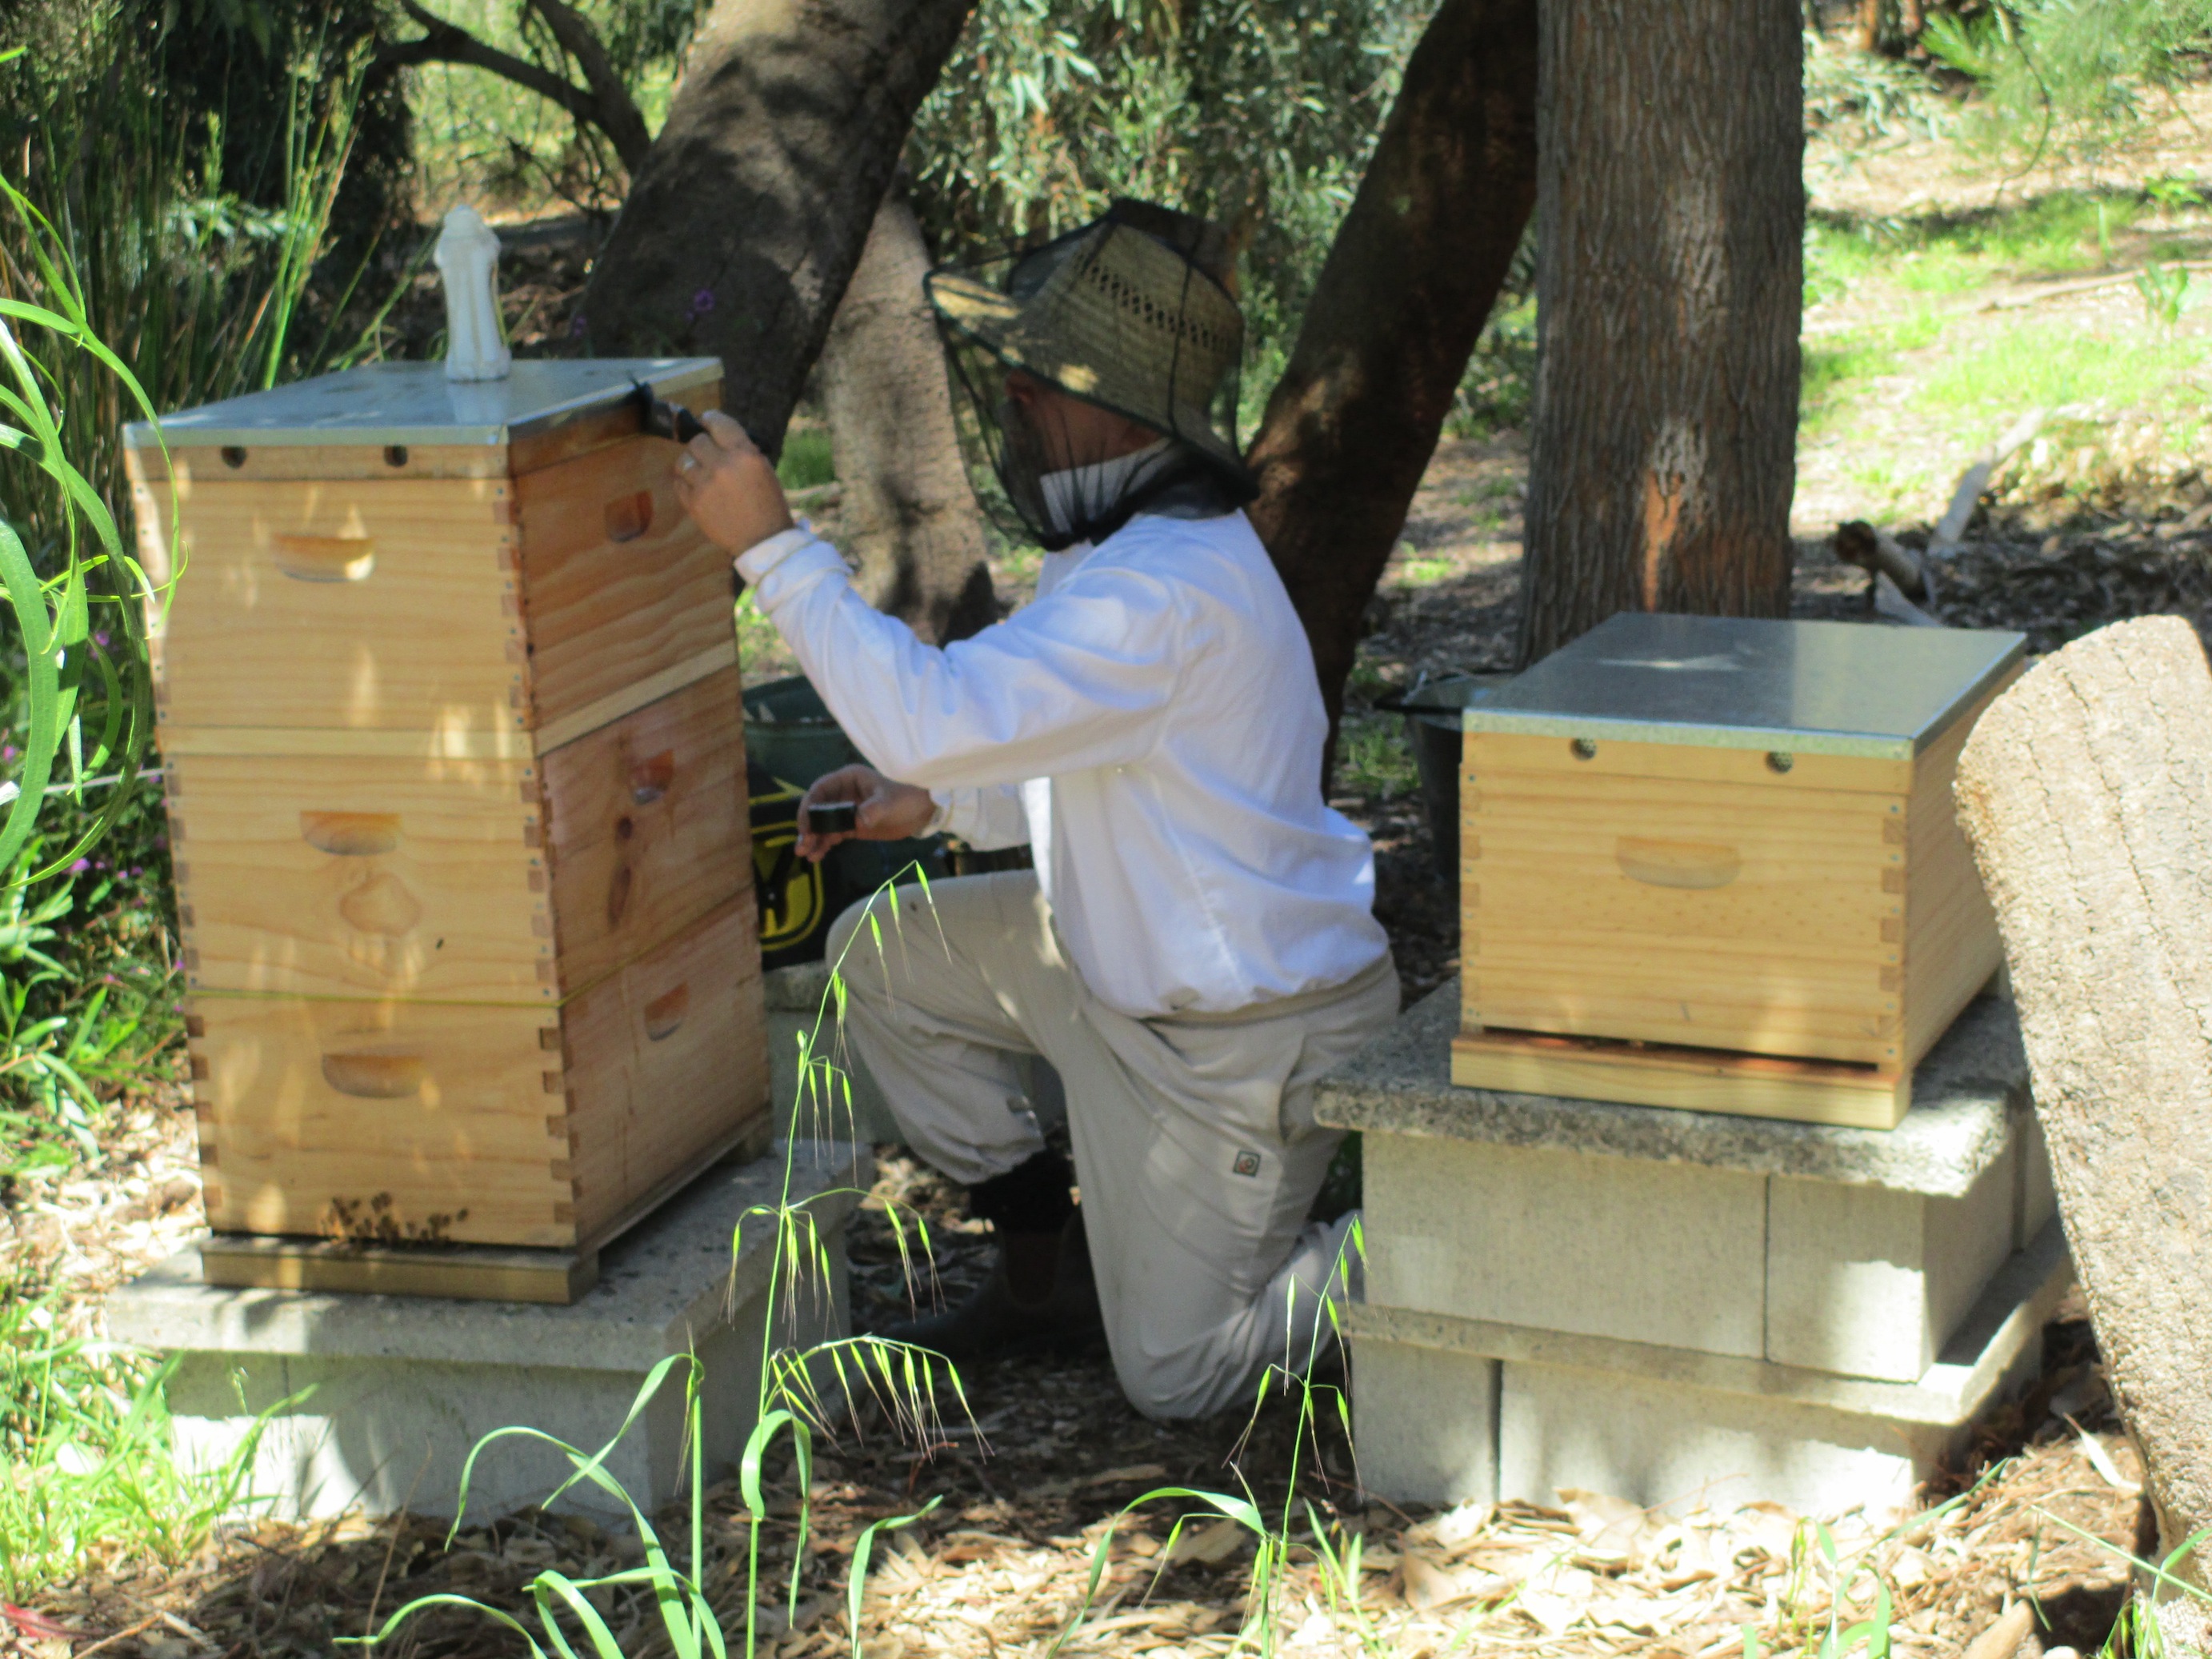 Giving the hives a coat of lanolin